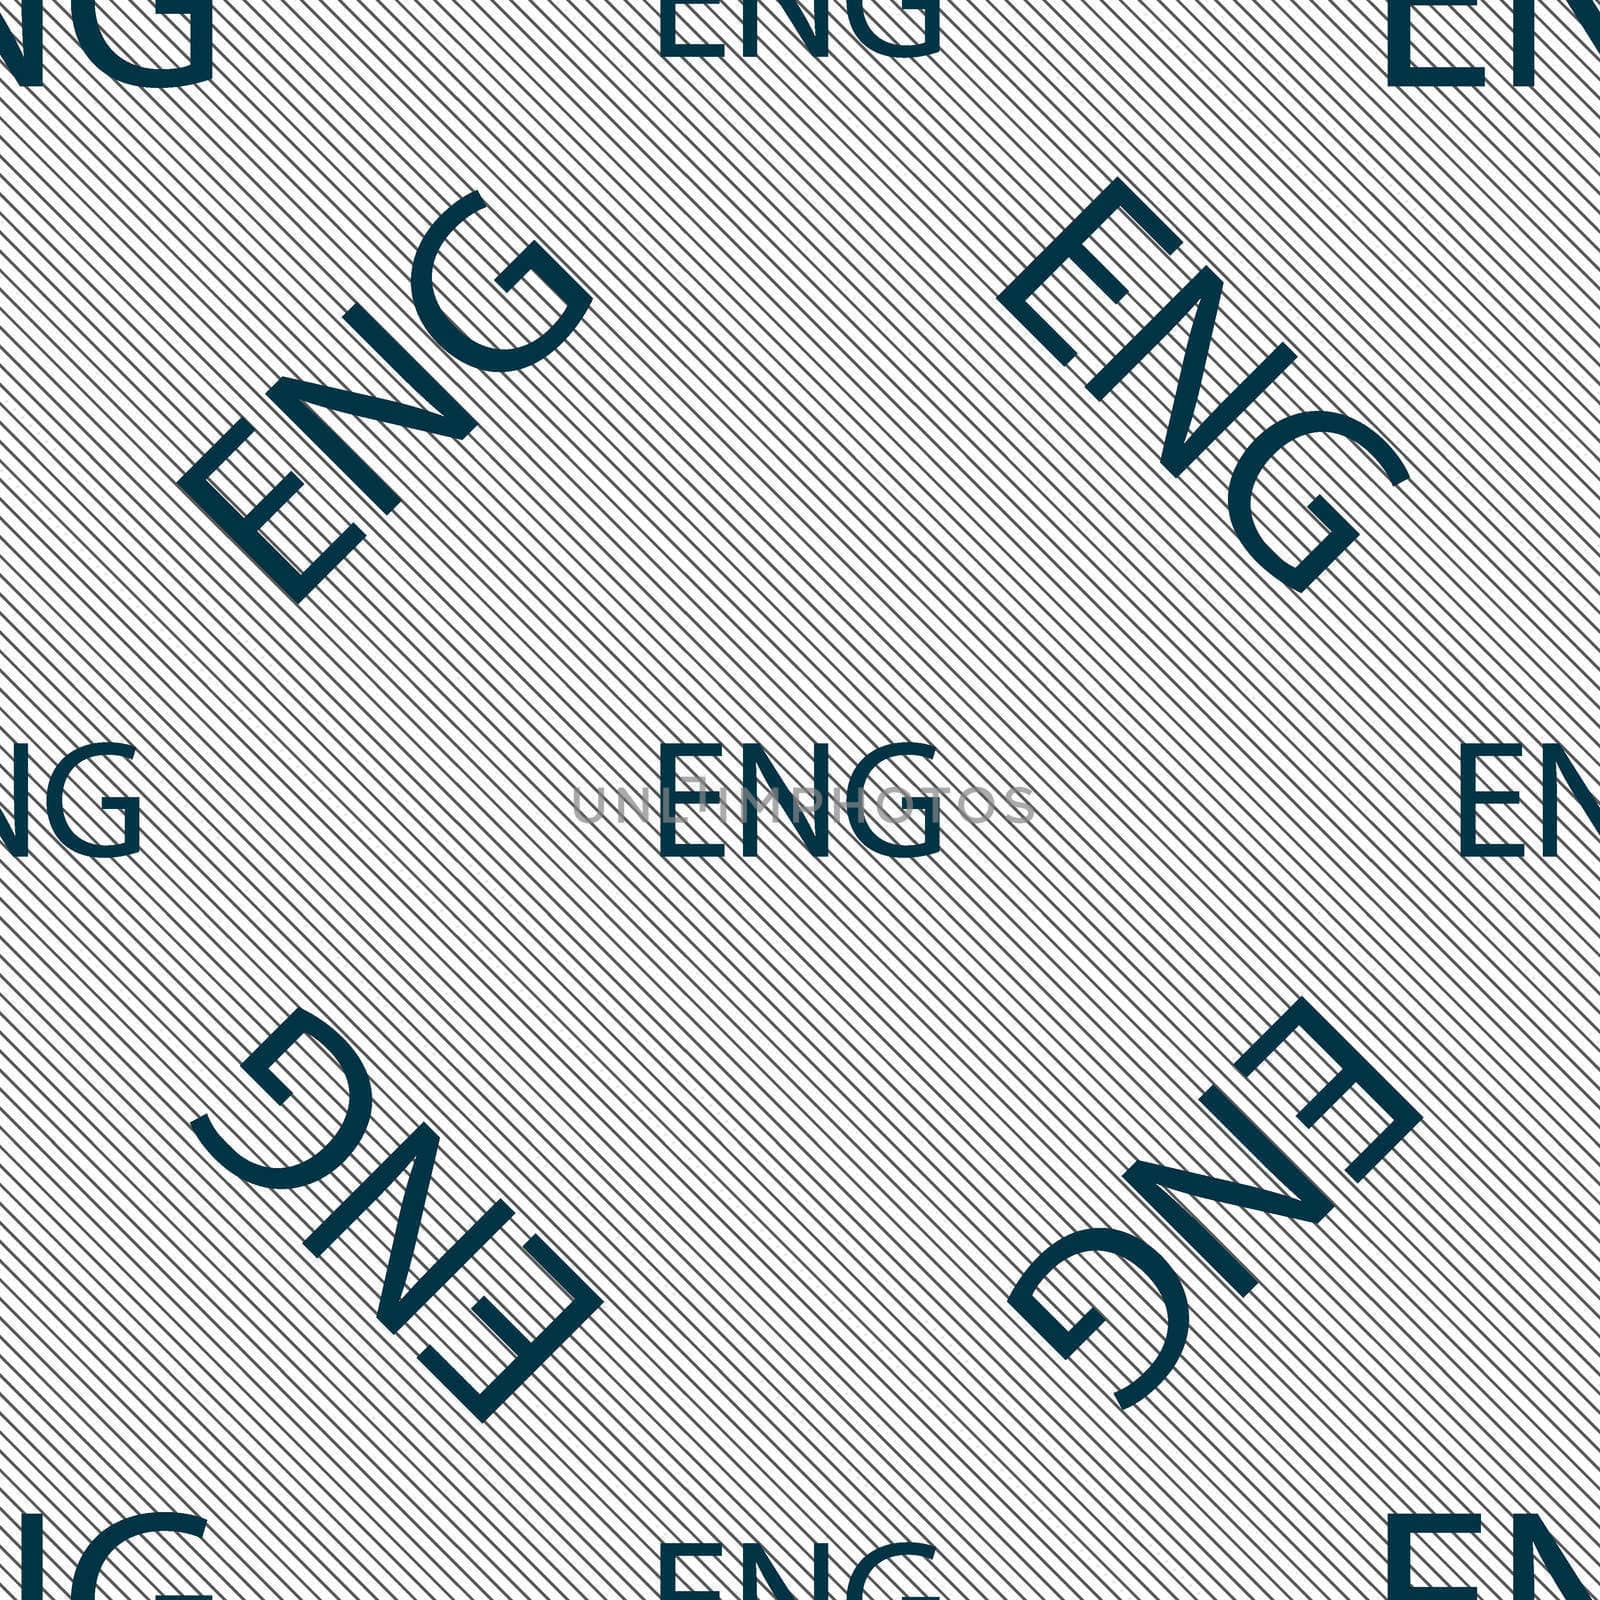 English sign icon. Great Britain symbol. Seamless pattern with geometric texture. illustration